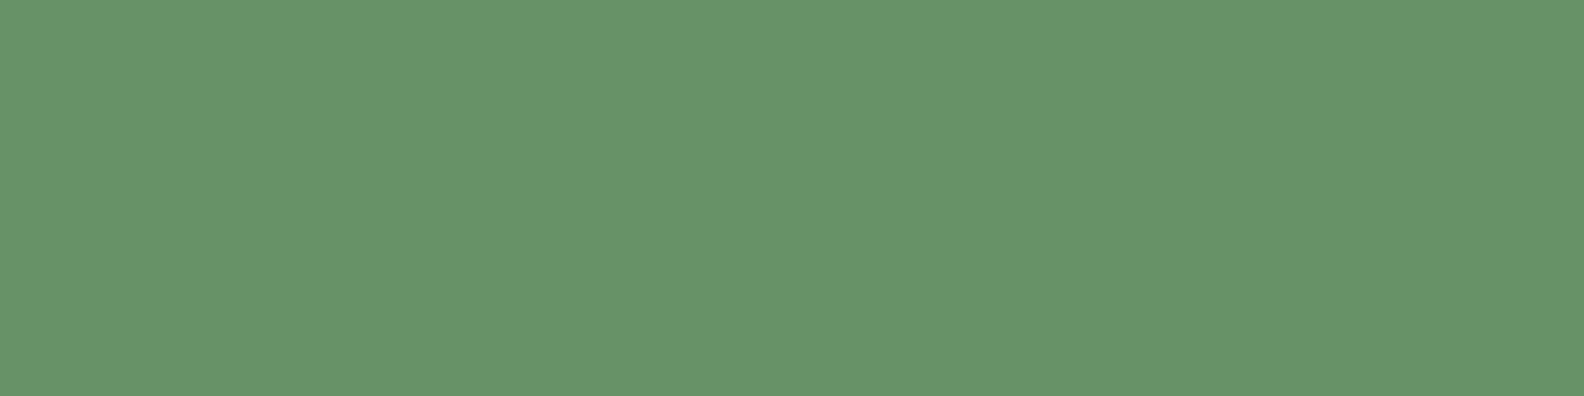 1584x396 Russian Green Solid Color Background